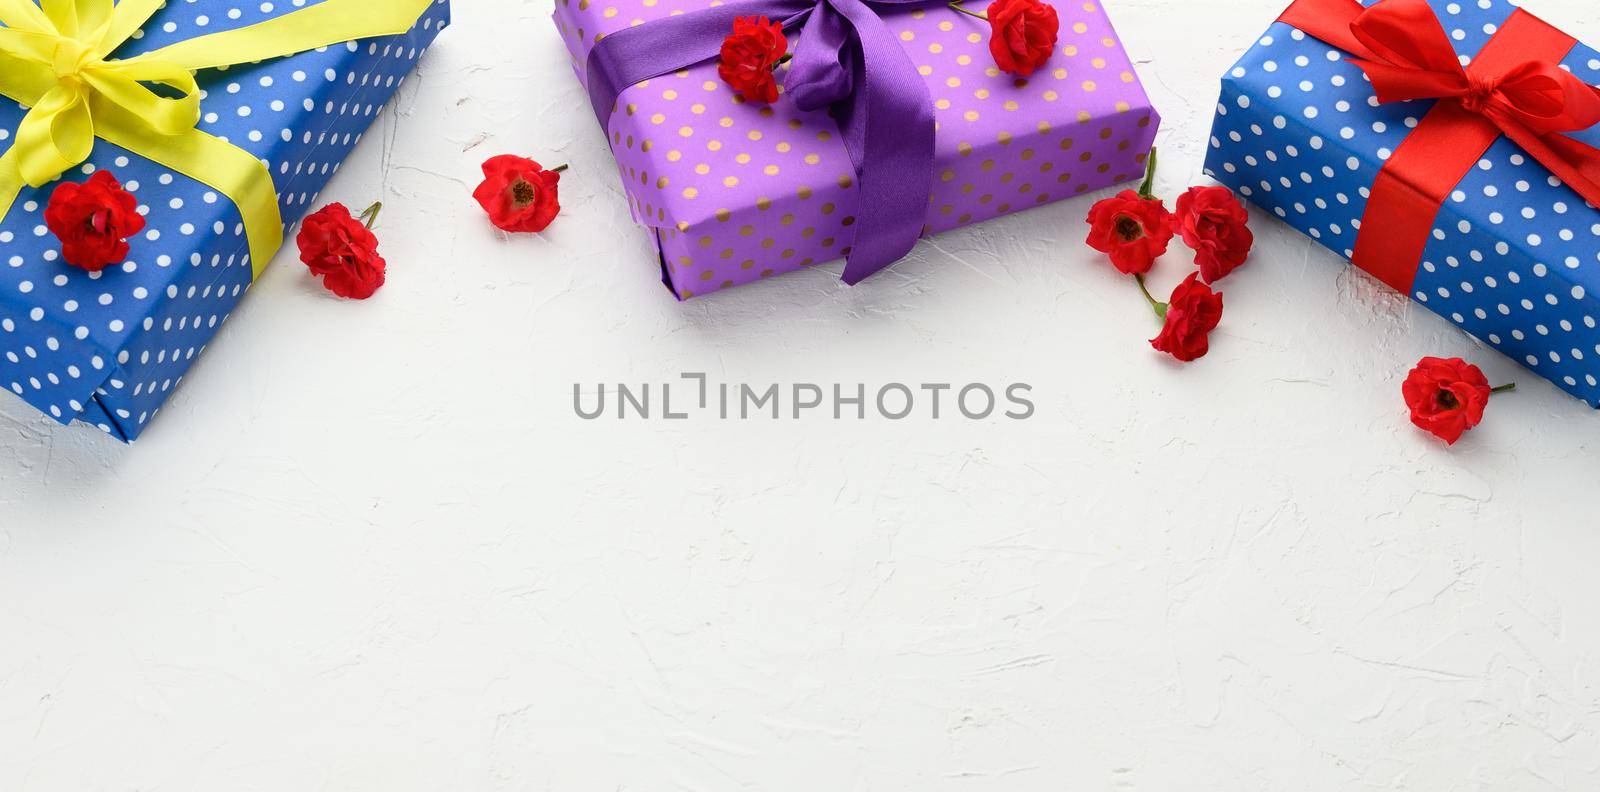 boxes are packed in holiday paper with polka dots and tied with a silk ribbon on a background, birthday gift, surprise by ndanko